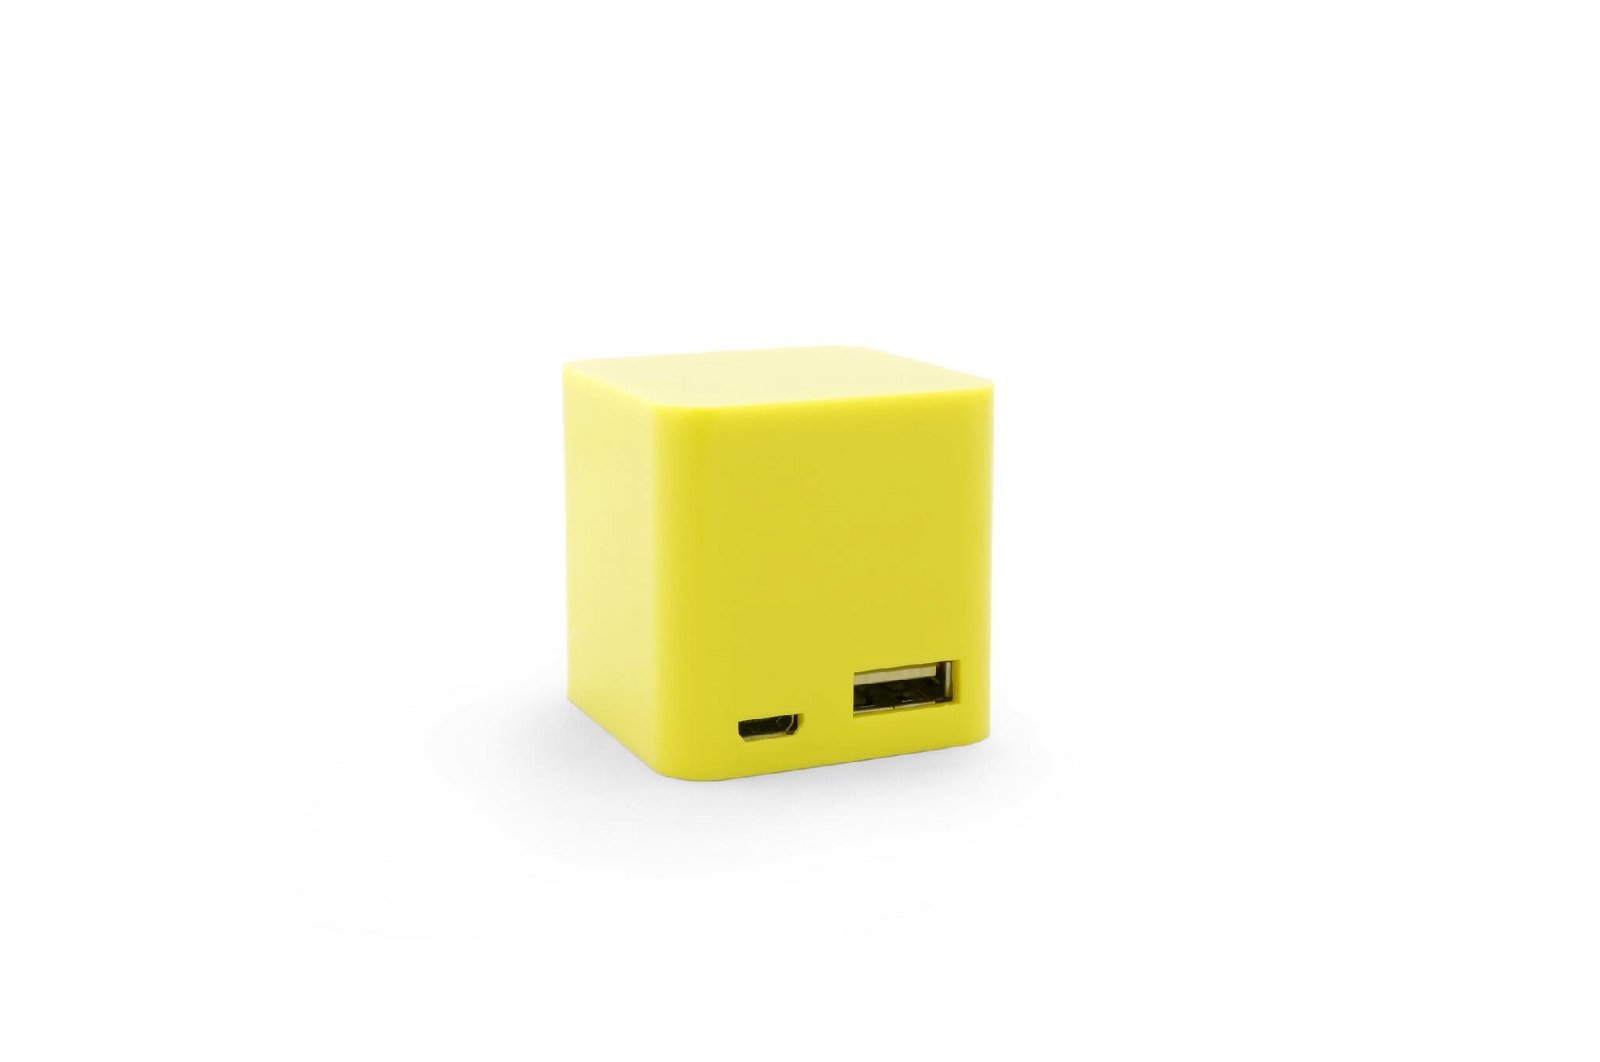 Cube Shape Smallest Size Power Bank with Candy Colors 5